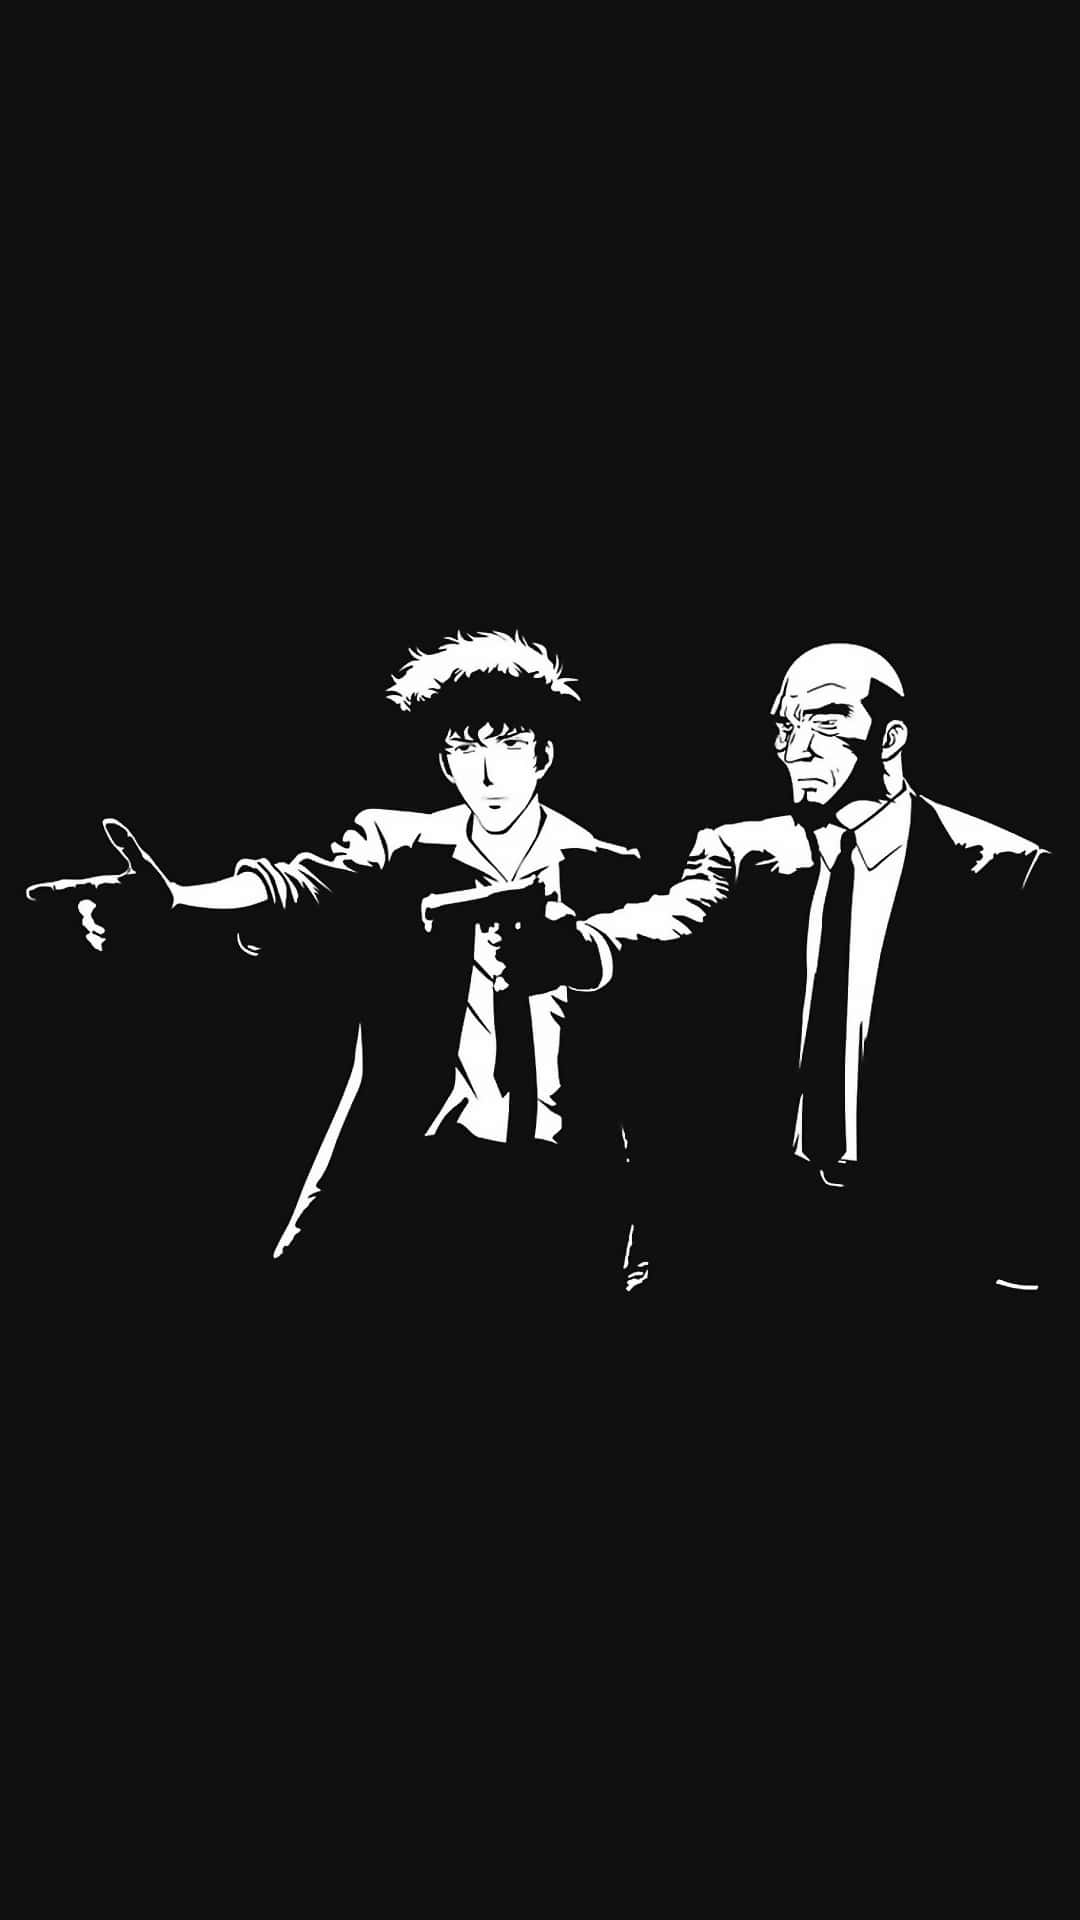 "Explore the Cowboy Bebop universe with your Iphone" Wallpaper